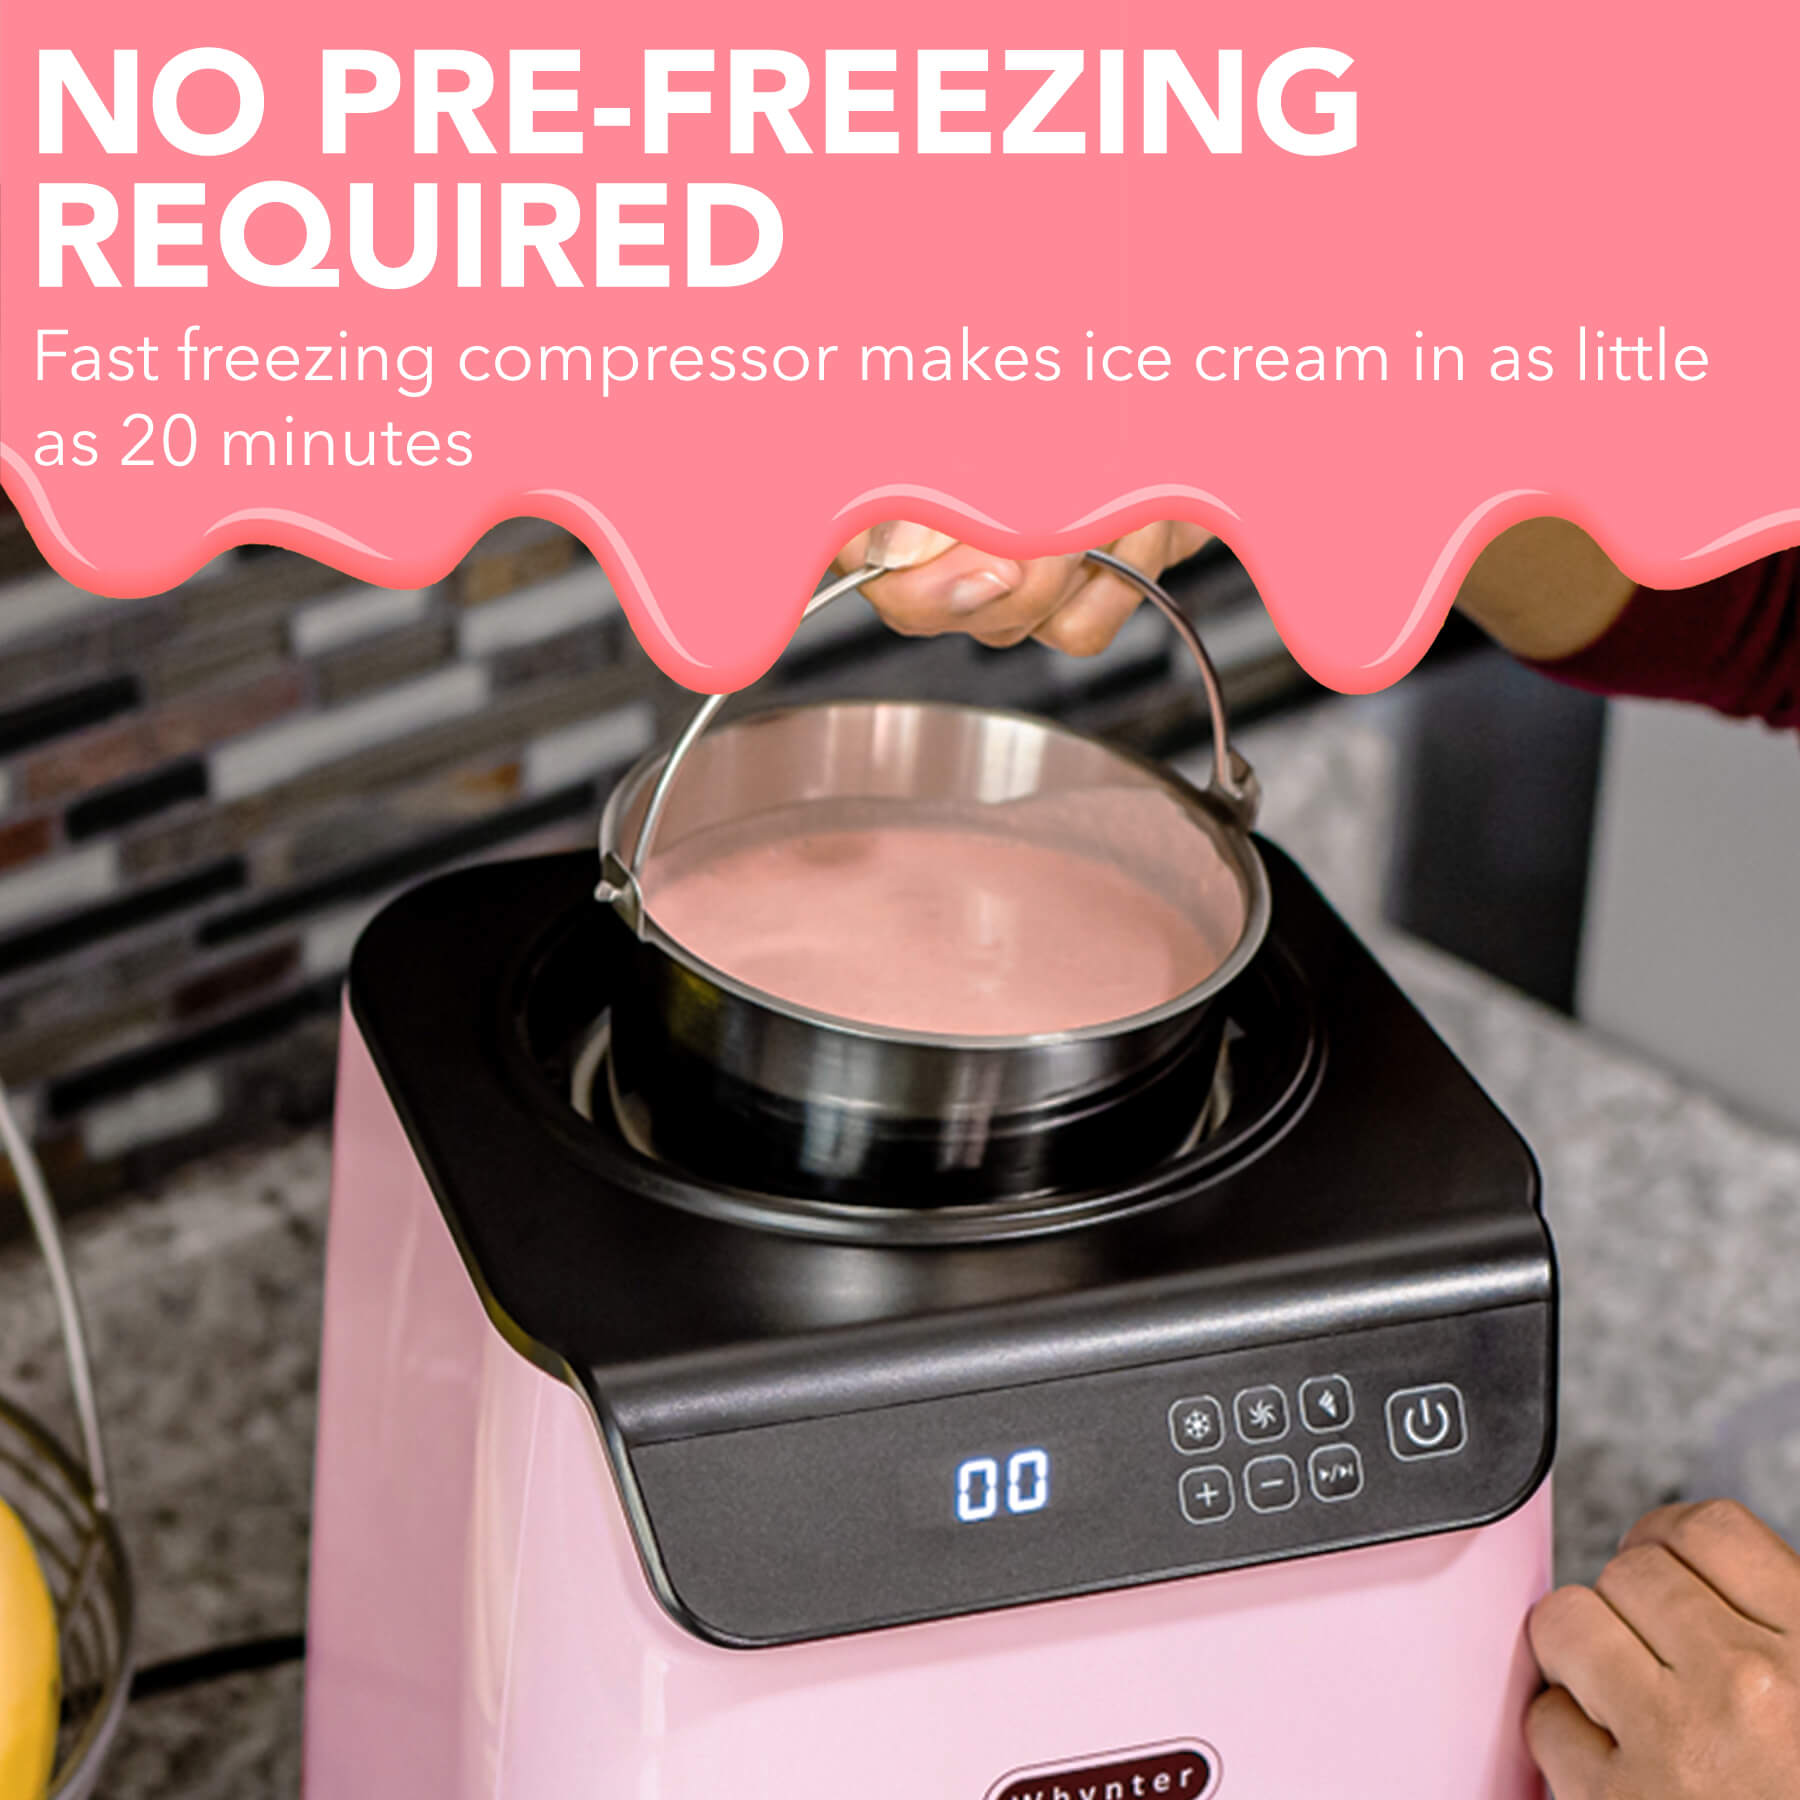 Whynter Limited Edition Pink Compressor Ice Cream Maker